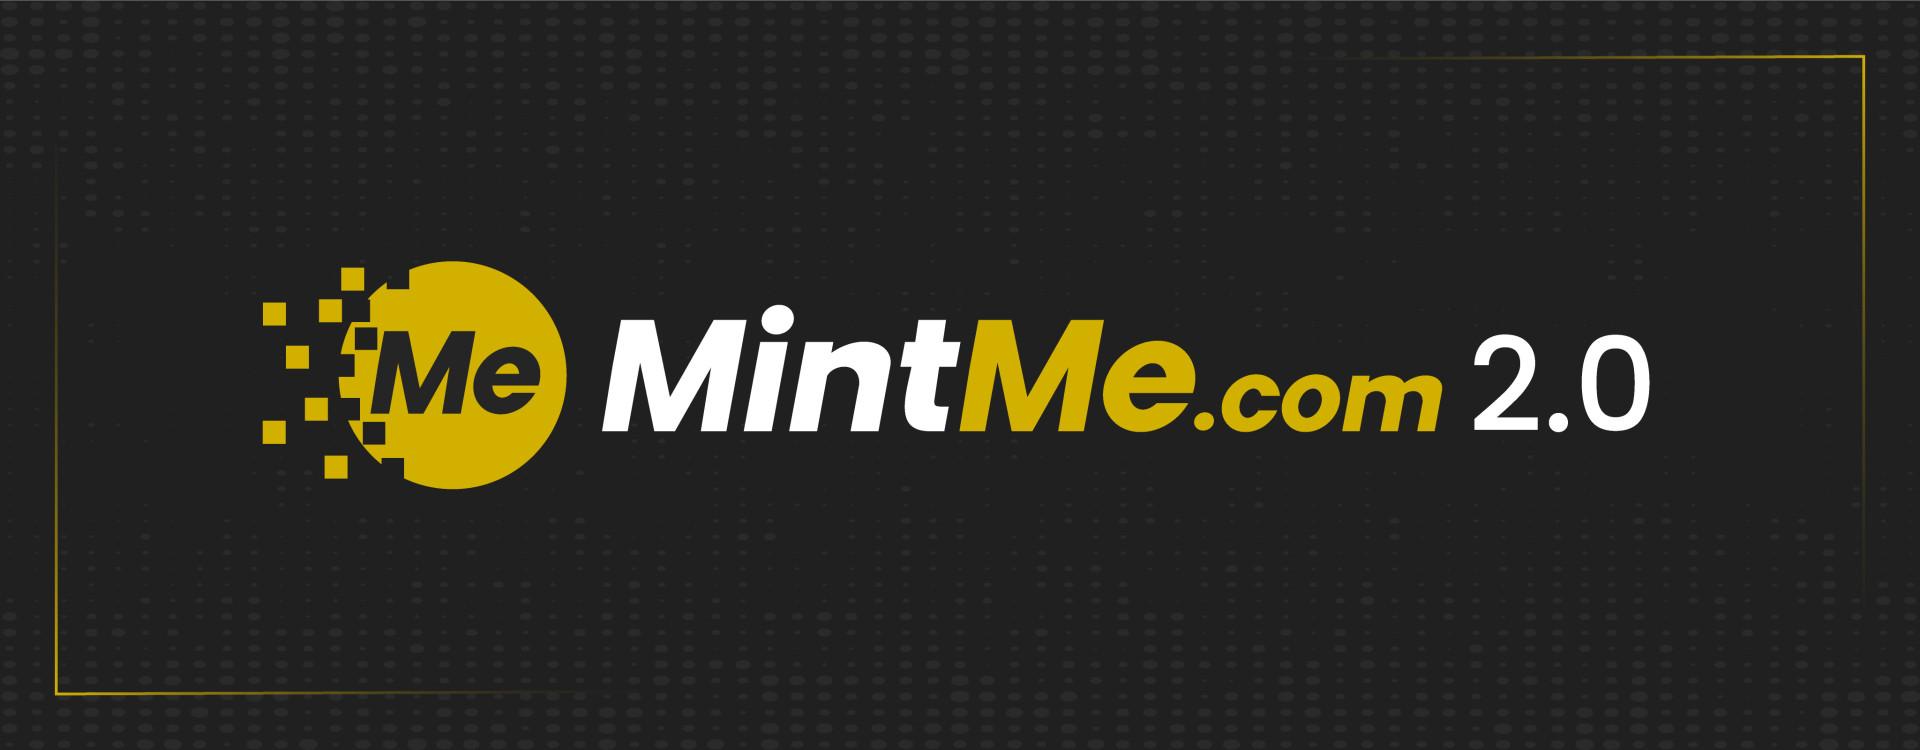 gem 2 16660606999nMhFrm9Yb MintMe.com Coin Secures 25 Million Dollars Investment Commitment From GEM Digital Limited - CoinCheckup Blog